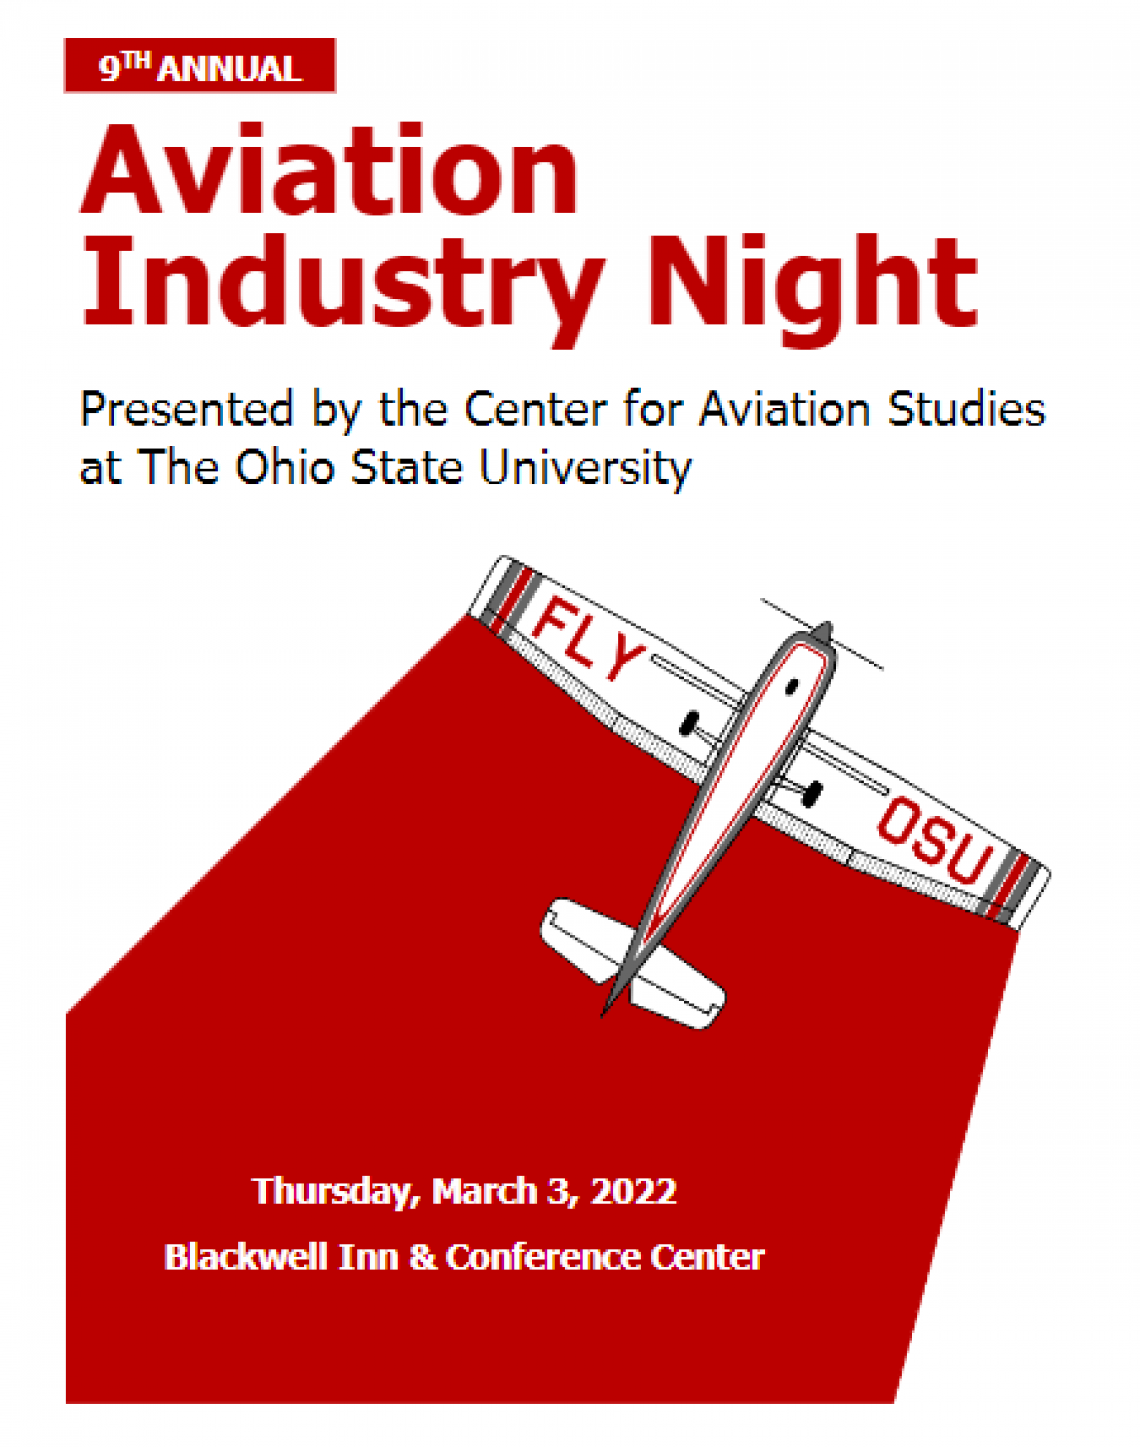 9th Annual Aviation Industry Night